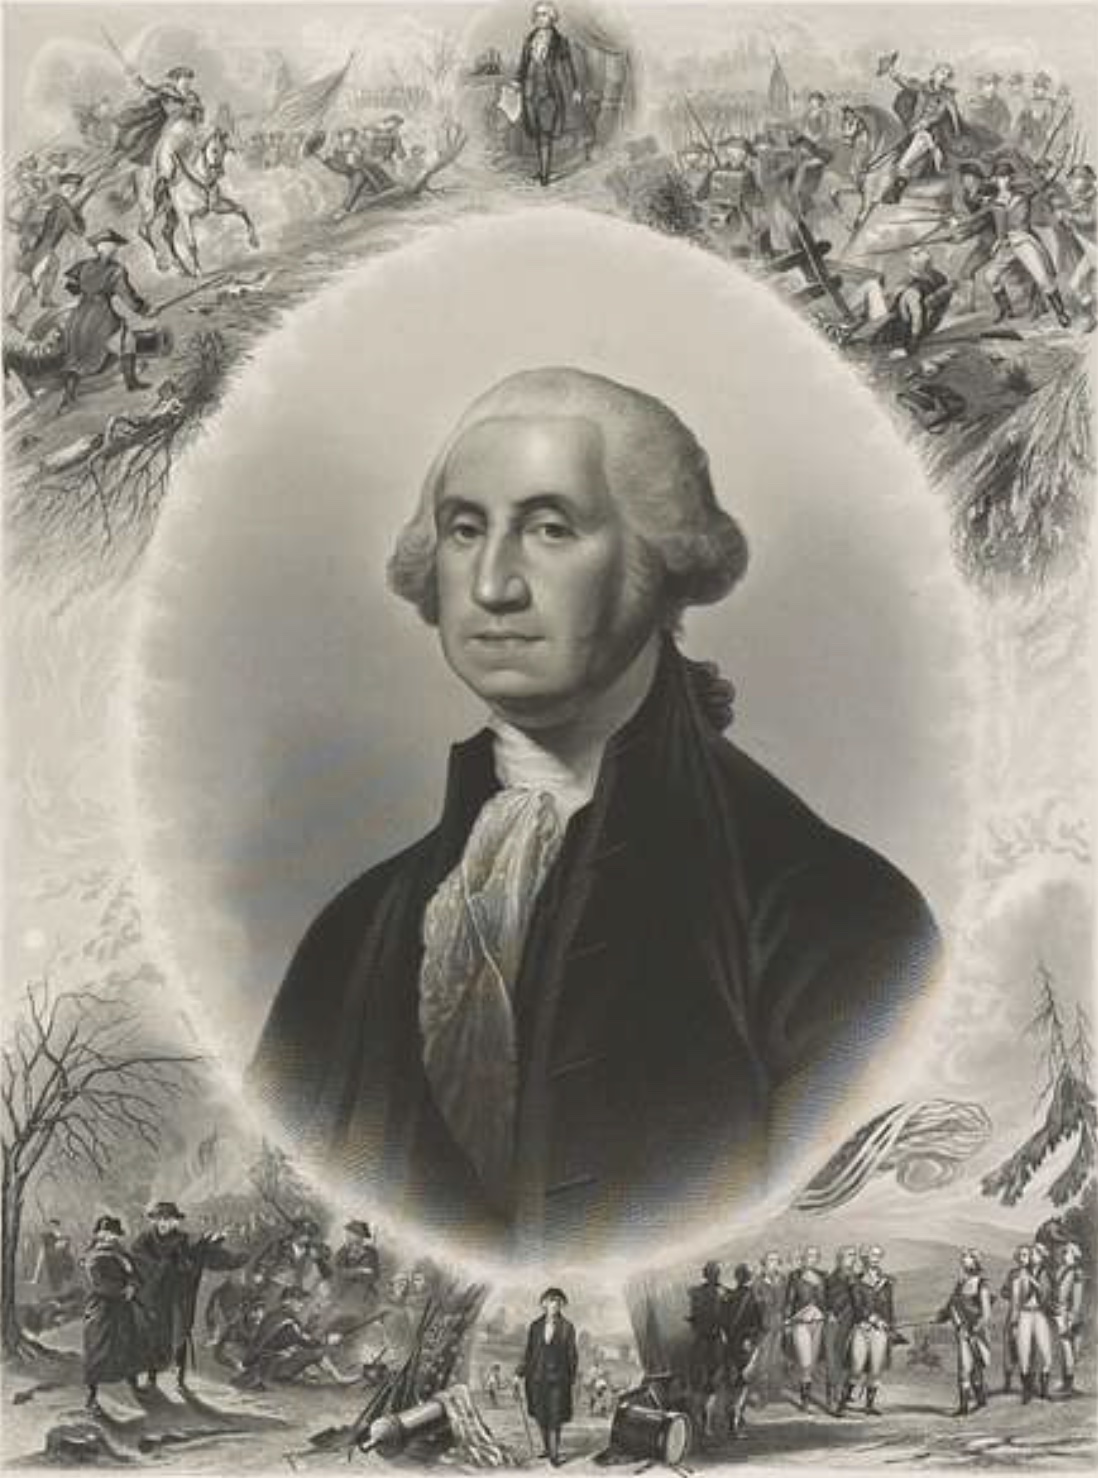 Small dropped lead shot with visible dimple · George Washington's